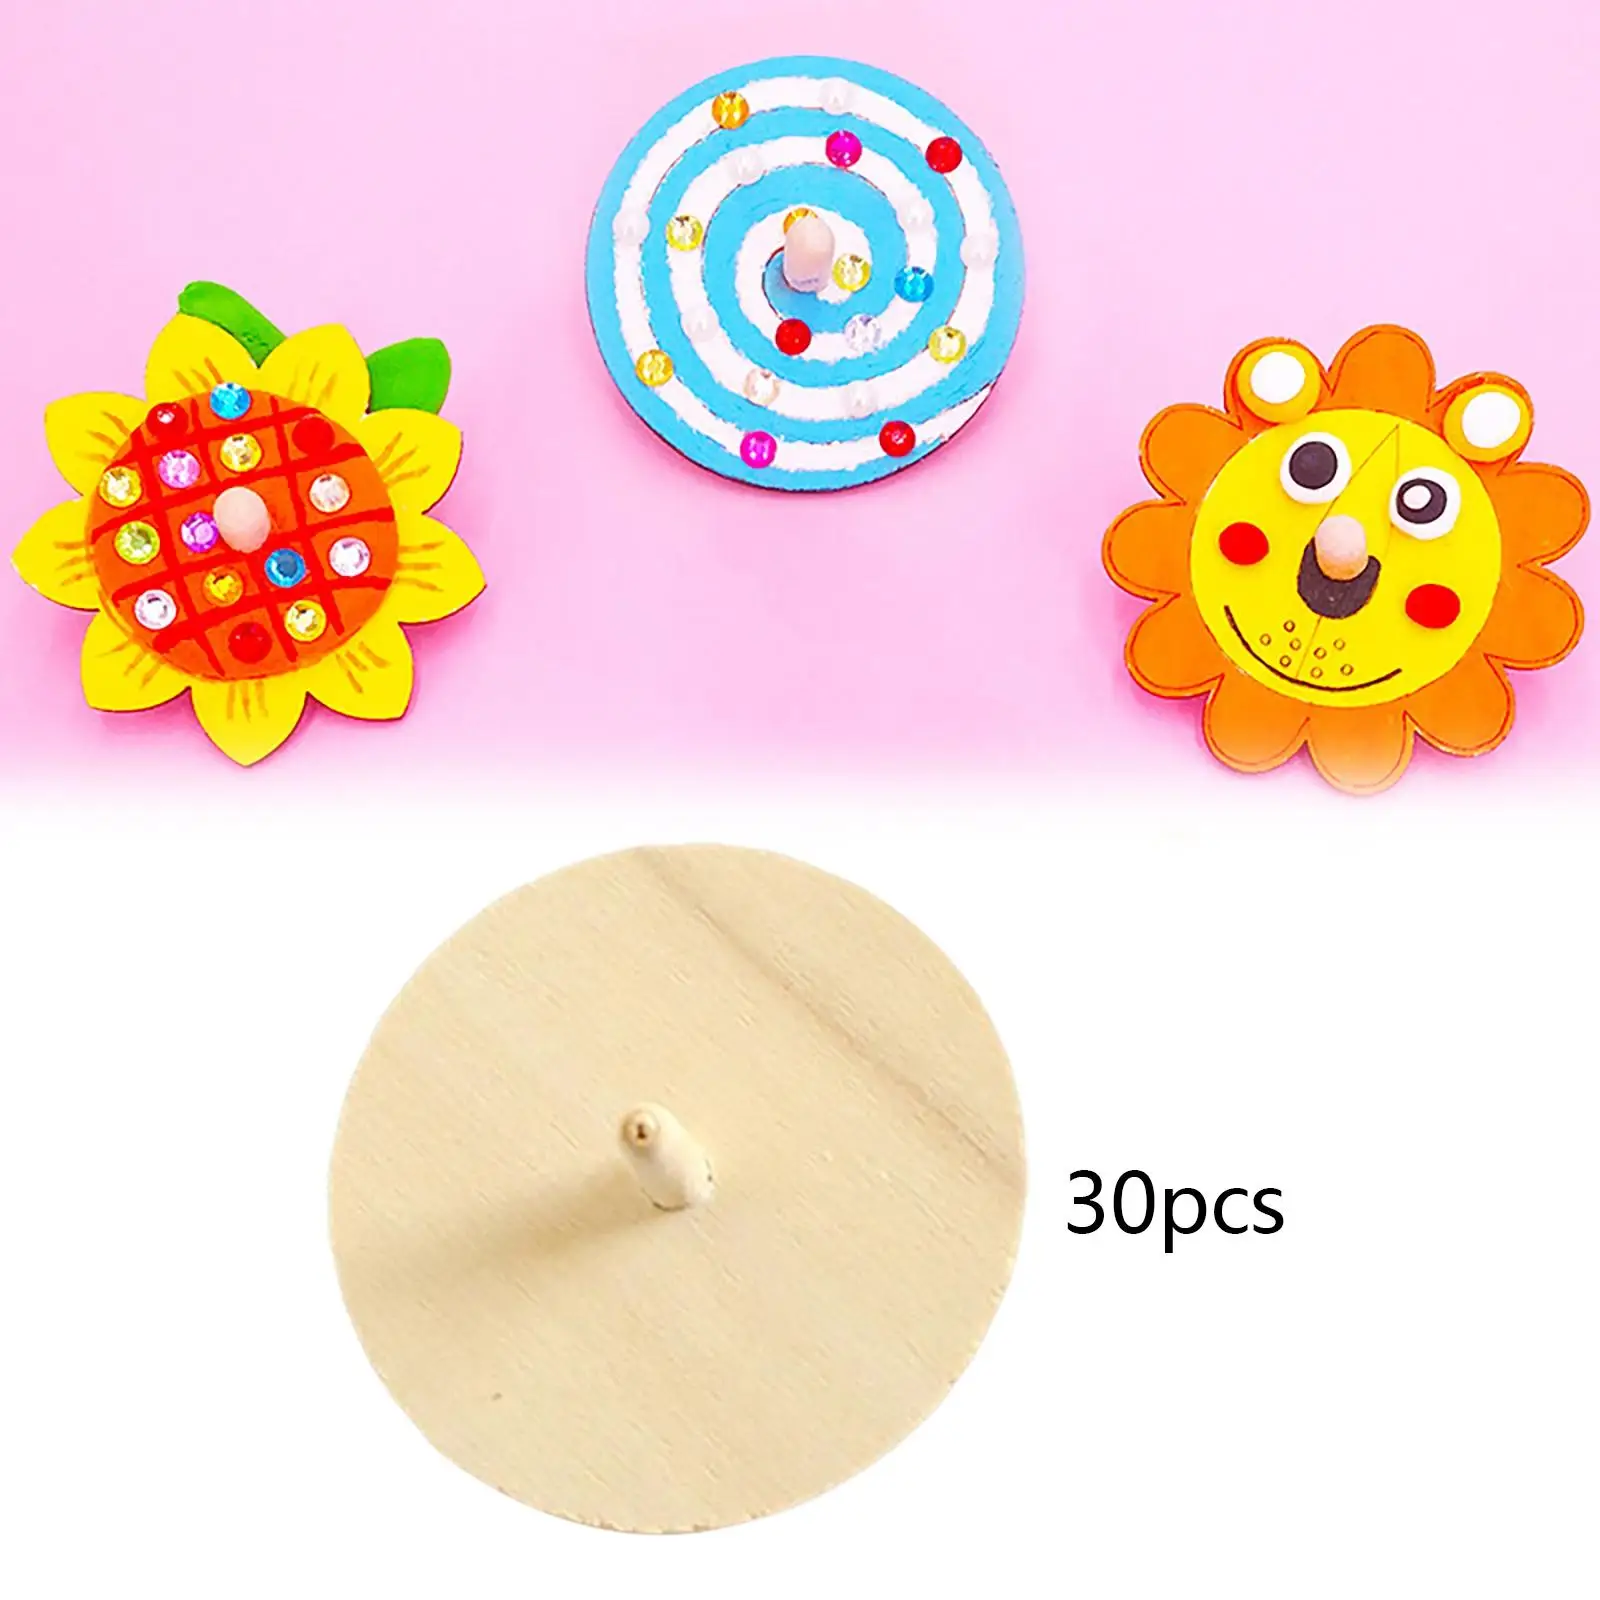 30Pcs Unfinished Wooden Spinner Top, , Kids Funny Gyroscope Educational Craft Handmade  Toddlers   Gift